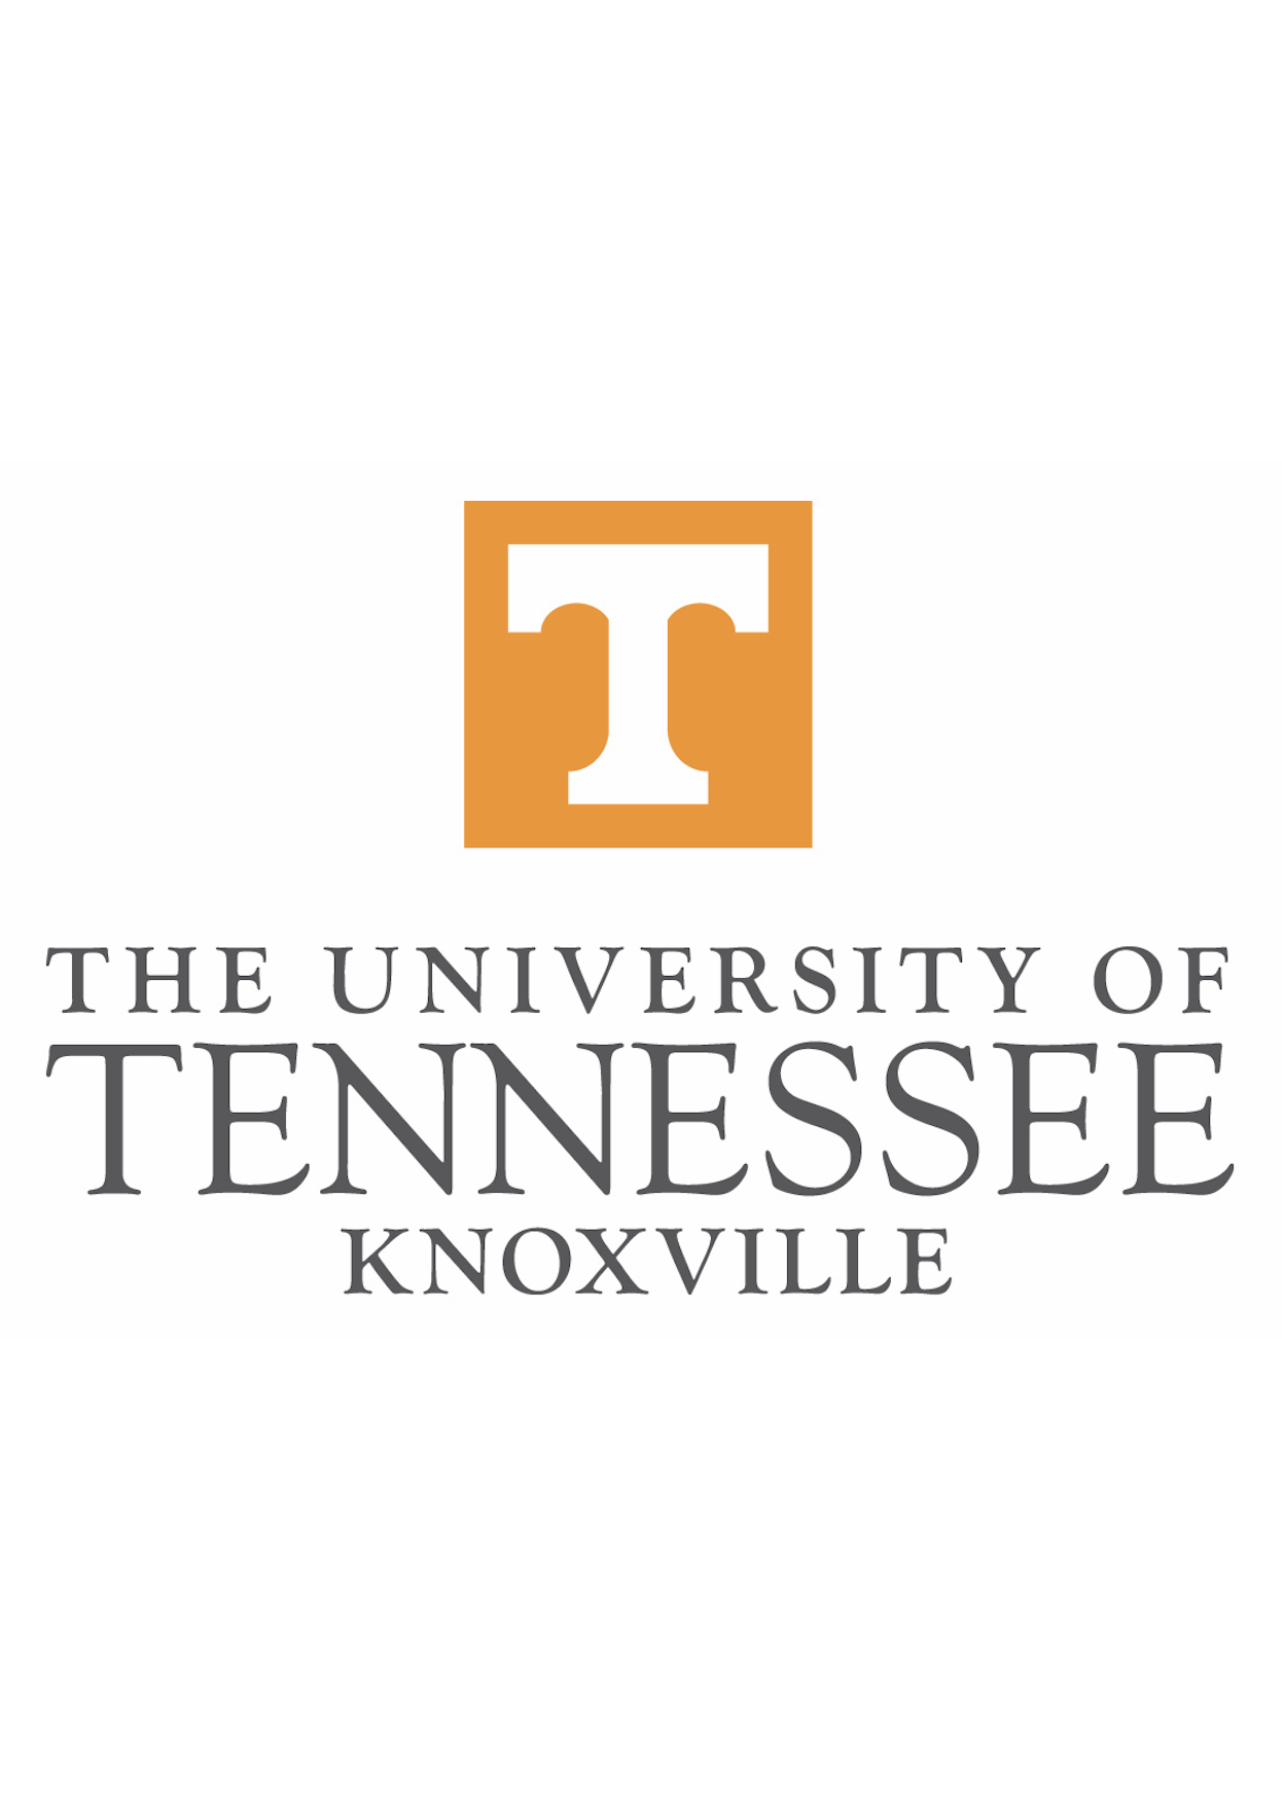 University of Tennessee, Knoxville